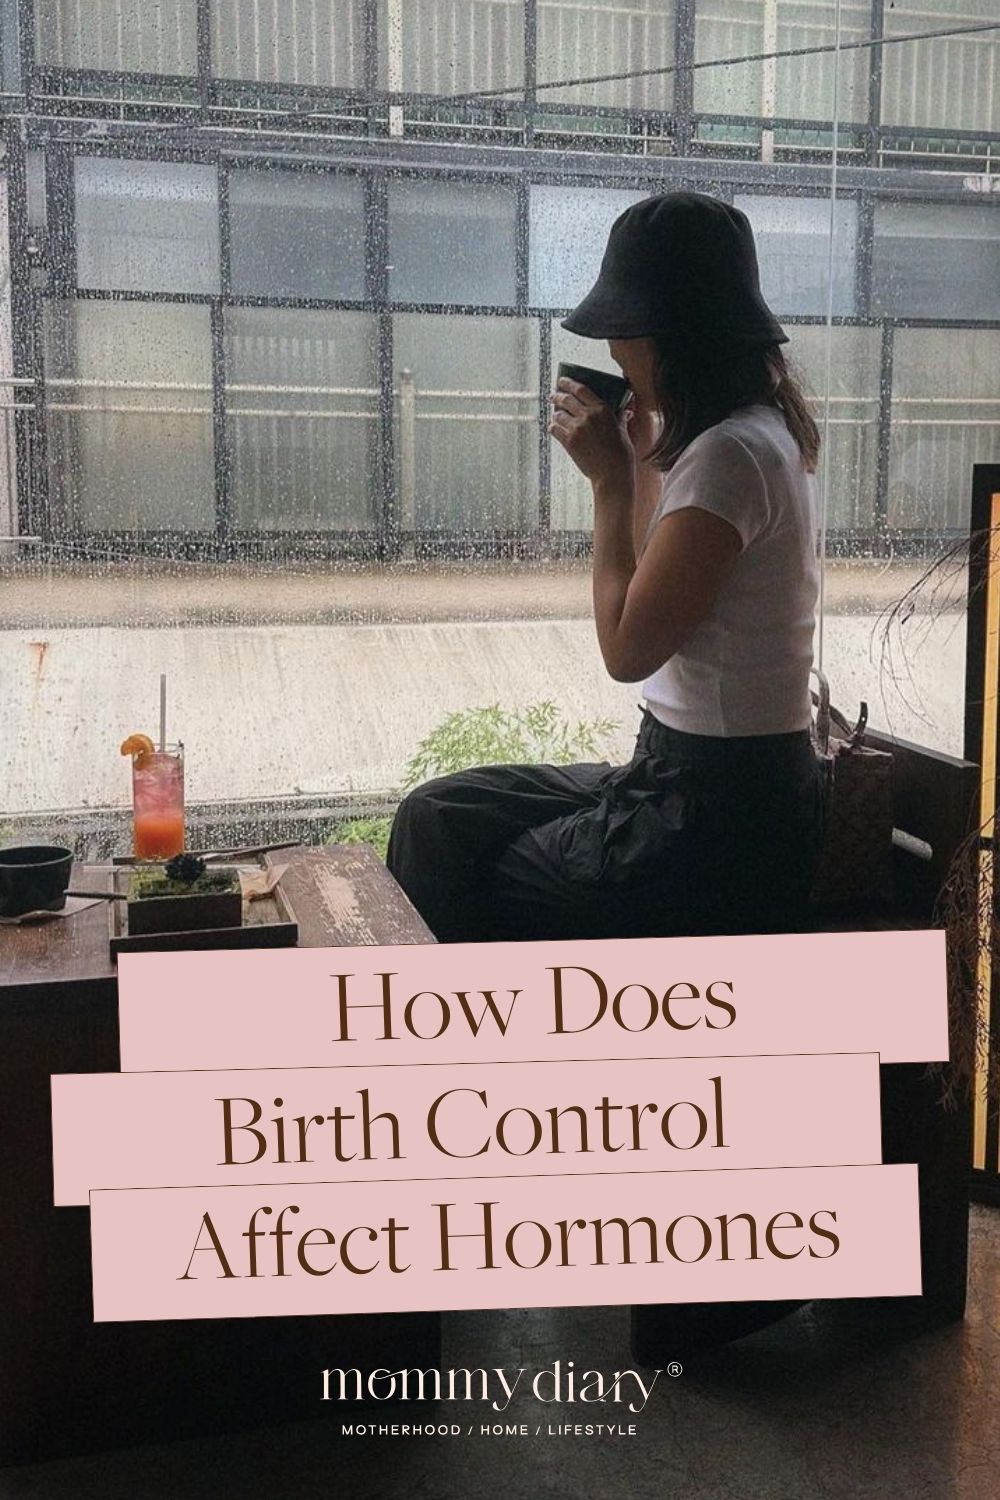 How Does Birth Control Affect Hormones?